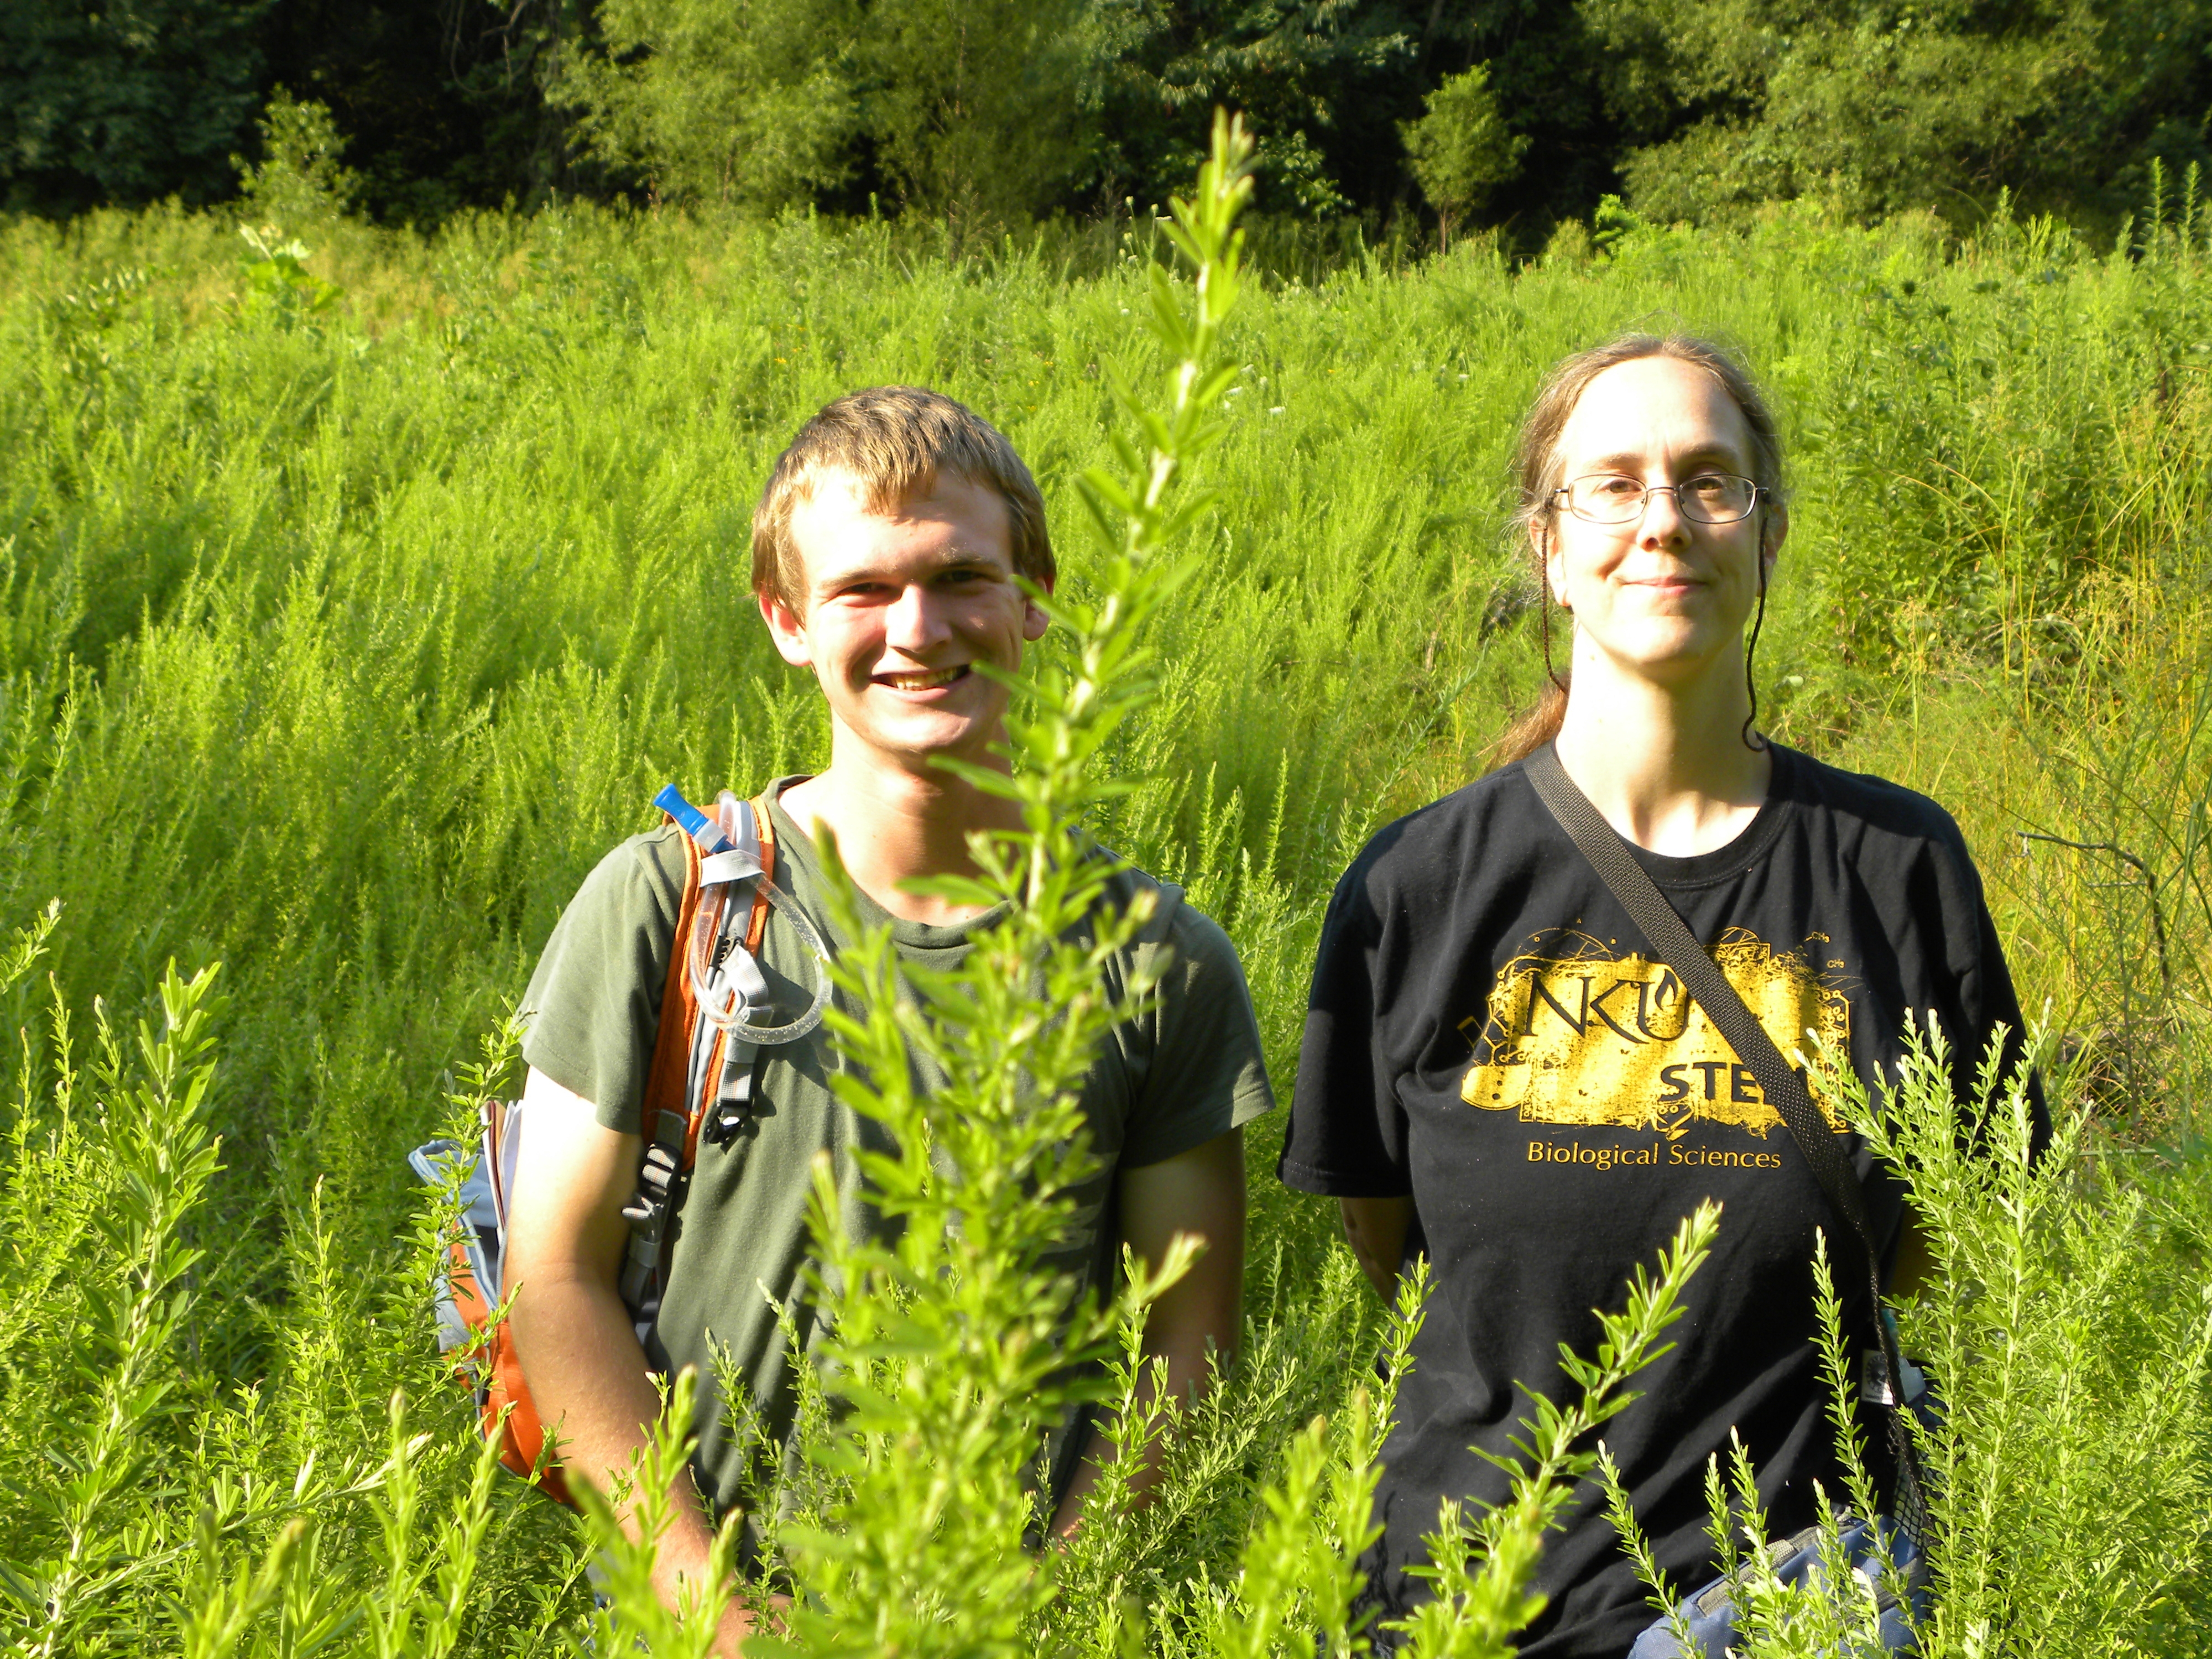 A photo of Dr. Whitson standing outside in tall grass with a student.